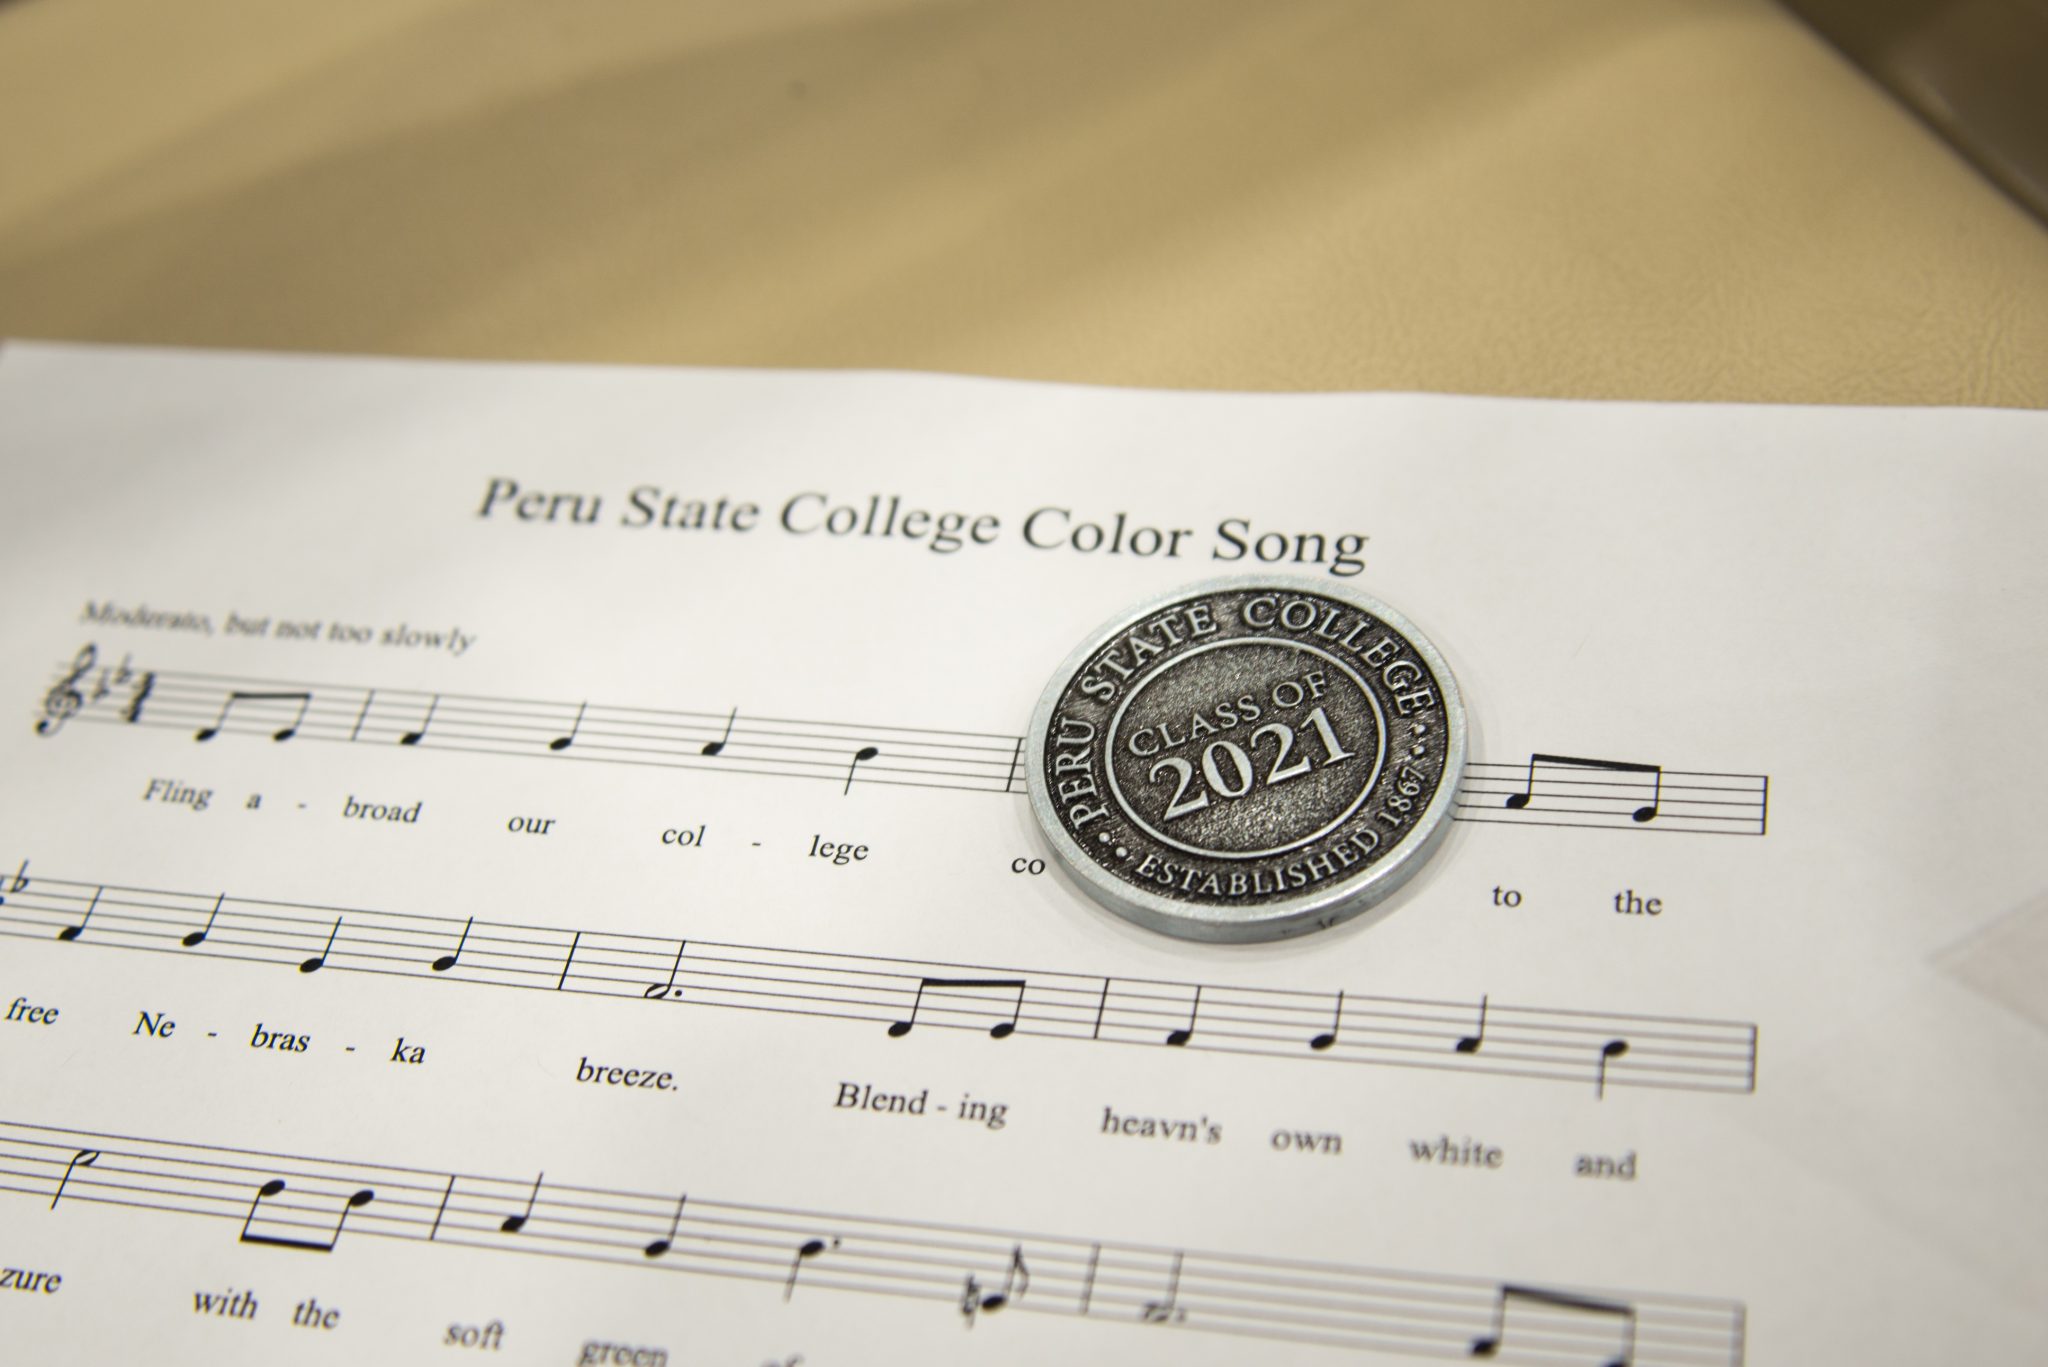 Color song sheet music and 2021 class coin